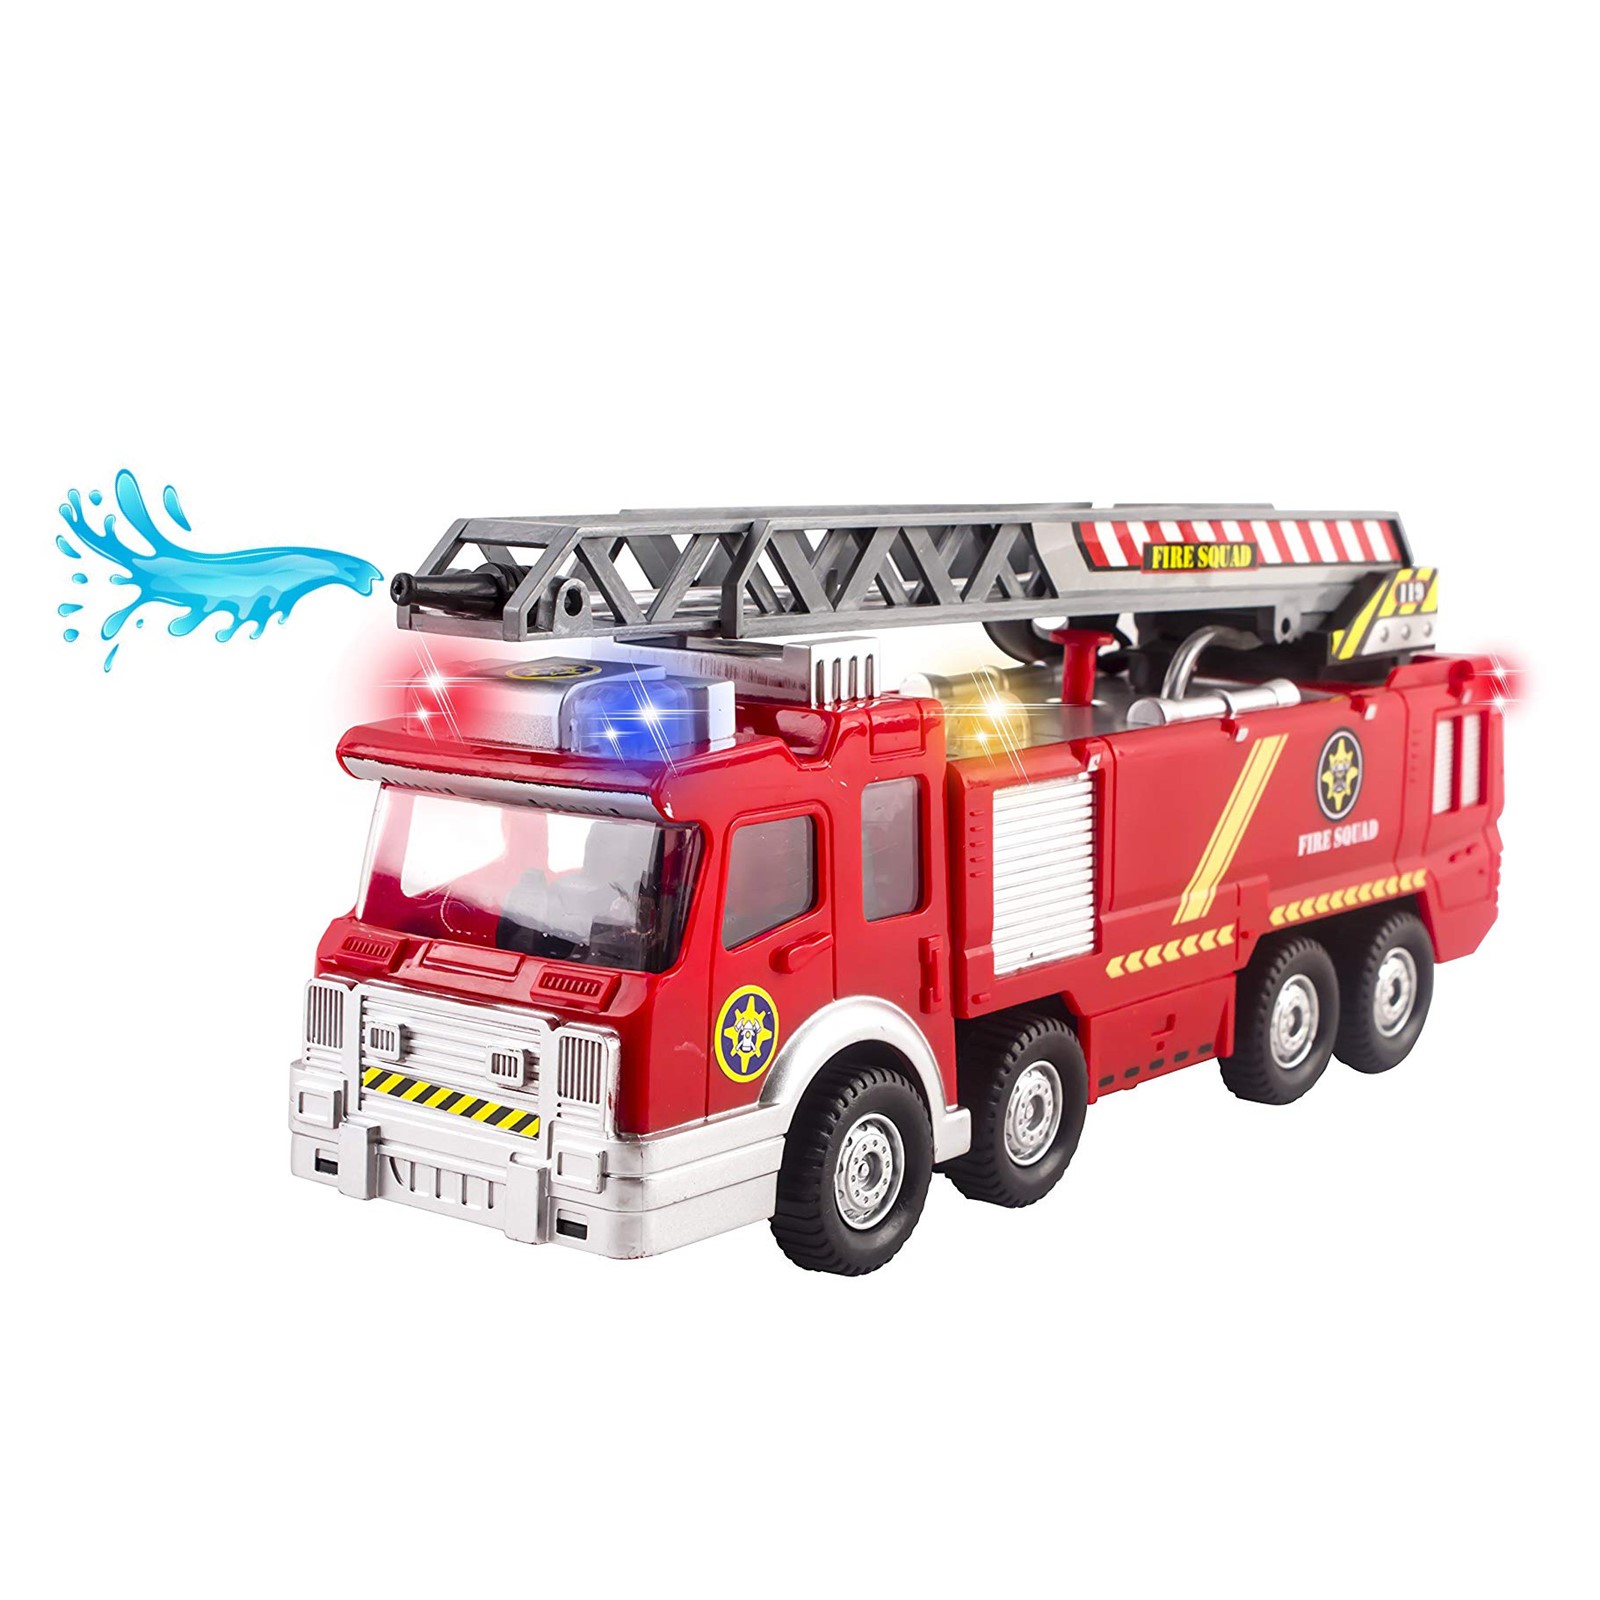 Fire Truck Toy Rescue With Shooting Water Flashing Lights and Siren Sounds Extending Ladder And Water Pump Hose That Shoots Water Perfect Bump And Go Action Firetruck for Boys Girls